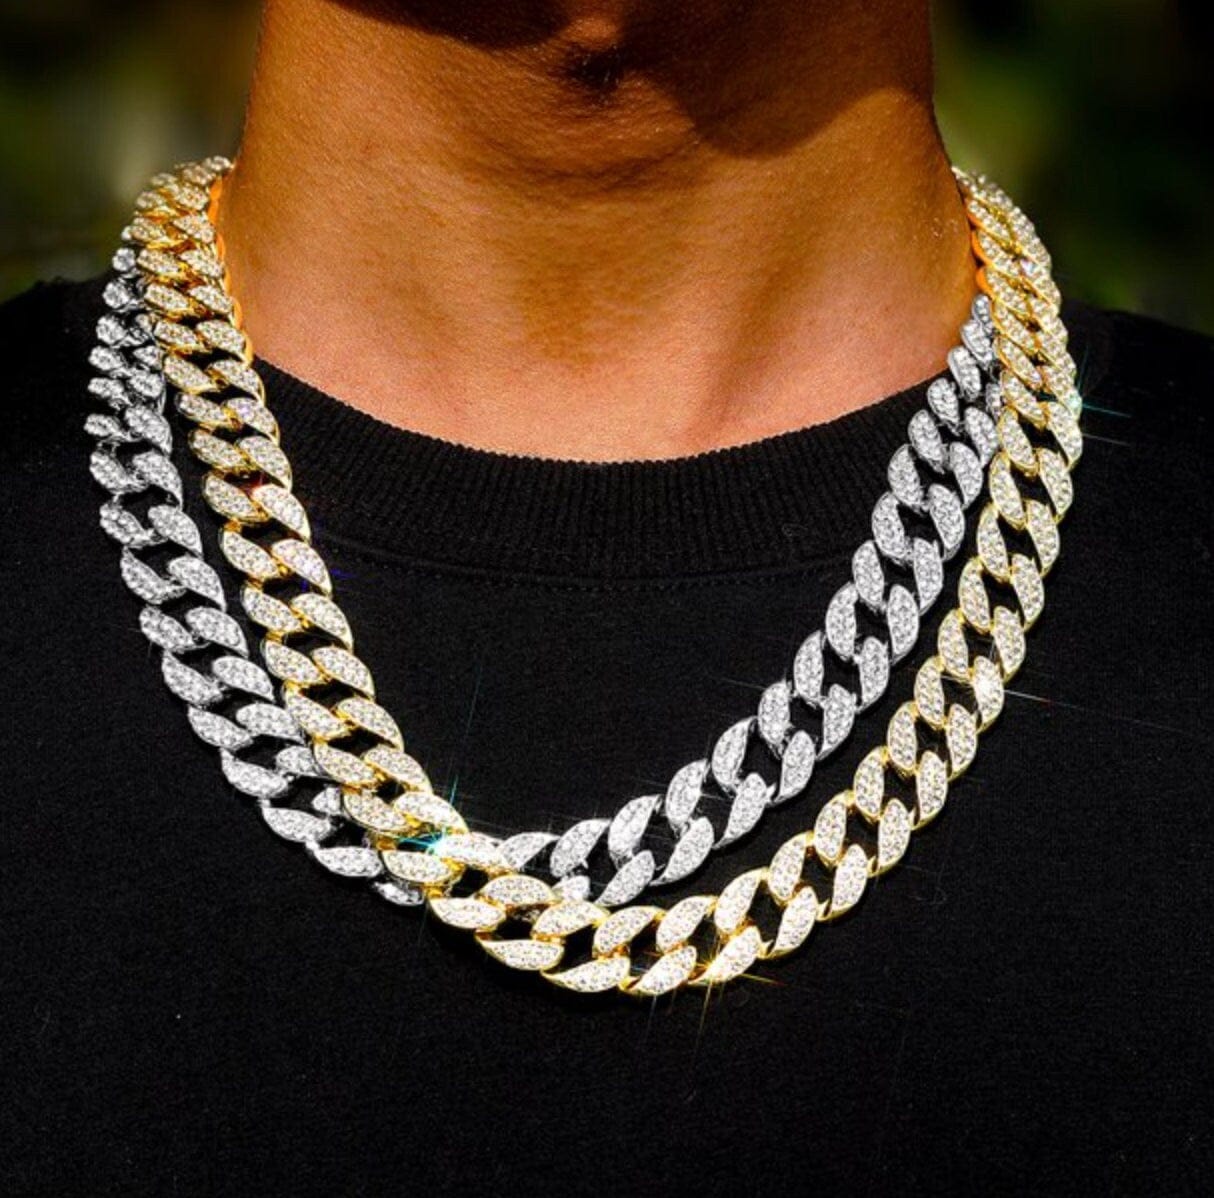 12MM Iced Diamond Miami Cuban Link Chain - 22IN Gold Stainless Steel Alloy - Men's Jewelry - Hip Hop Necklace - VVS Cubic Zirconia Gift Menf